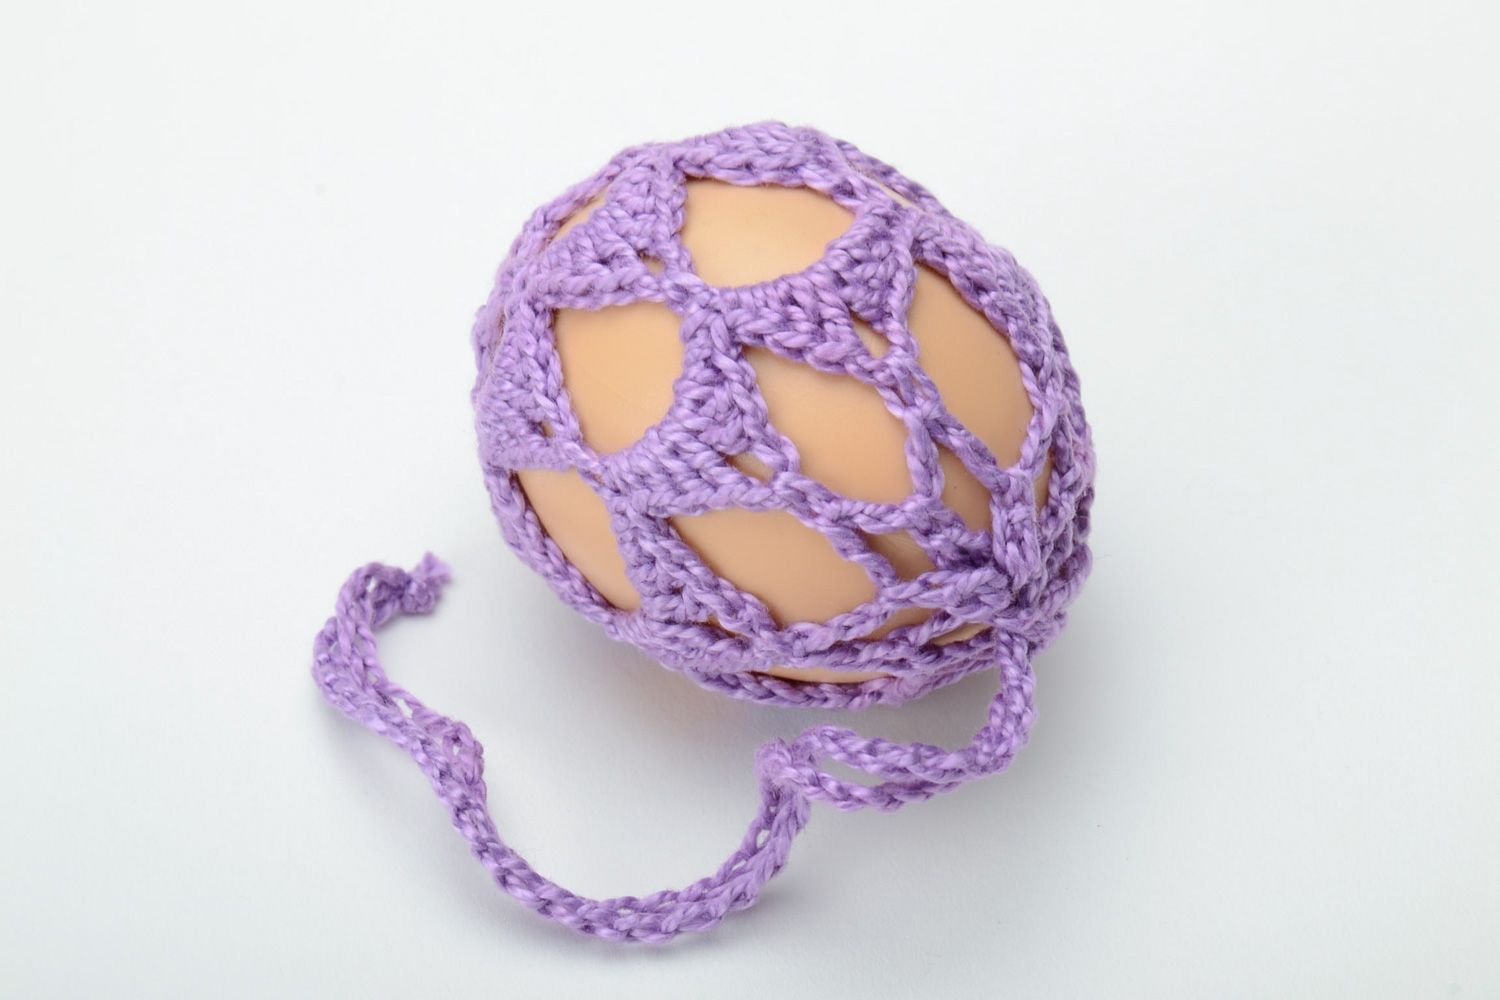 Homemade lilac interior pendant Easter egg woven over with threads photo 3